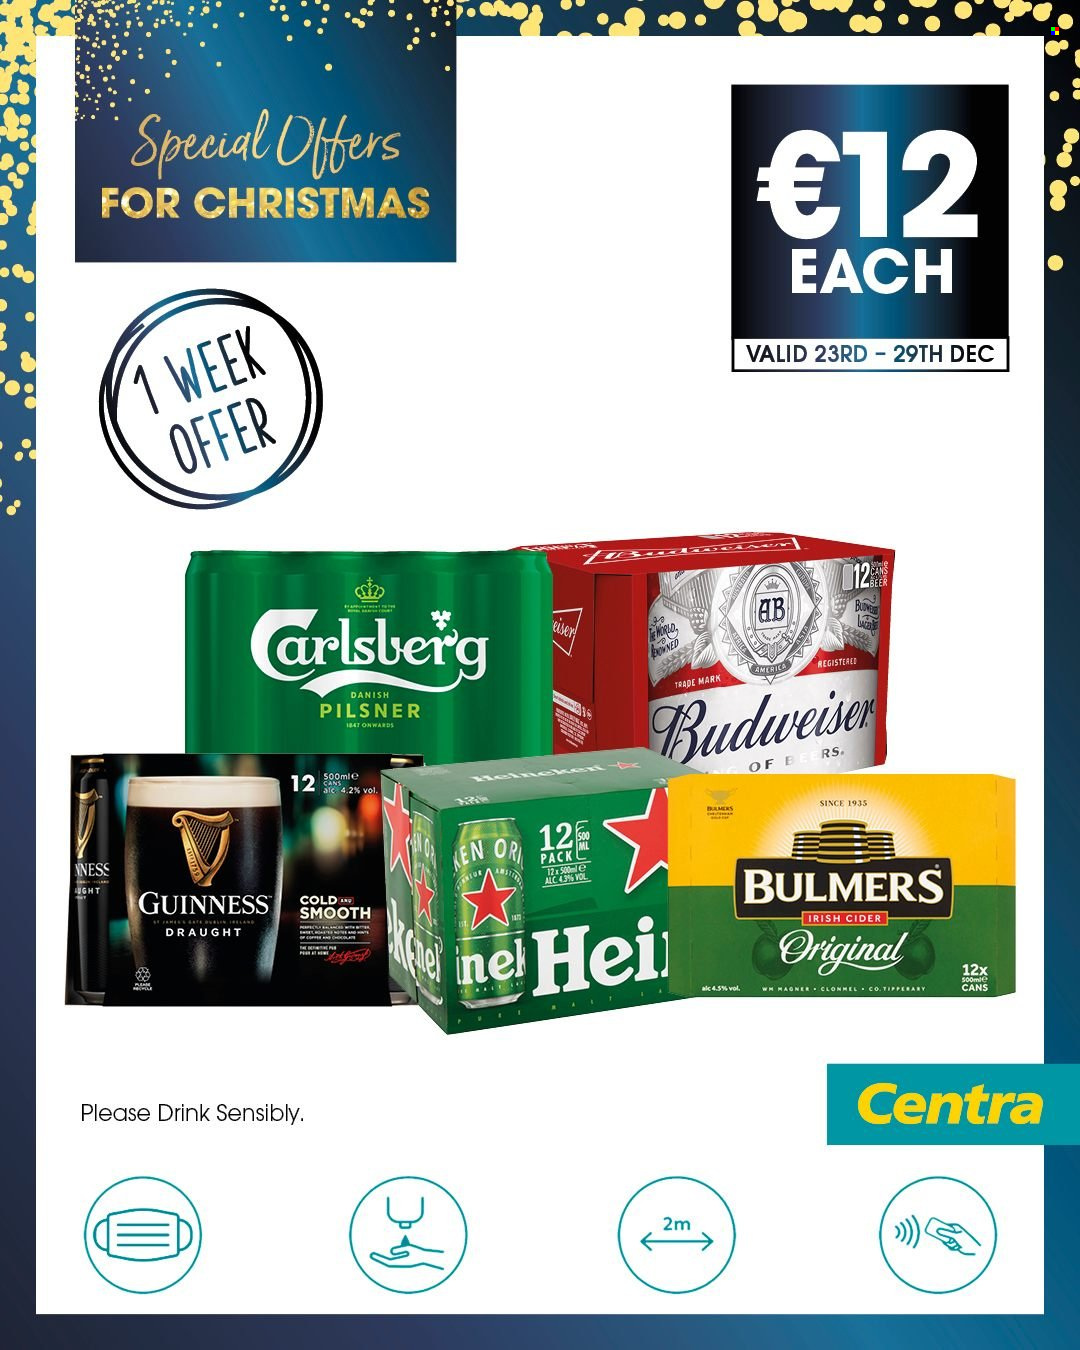 thumbnail - Centra offer  - 23.12.2021 - 29.12.2021 - Sales products - cider, beer, Bulmers, Carlsberg, Guinness, Budweiser. Page 2.